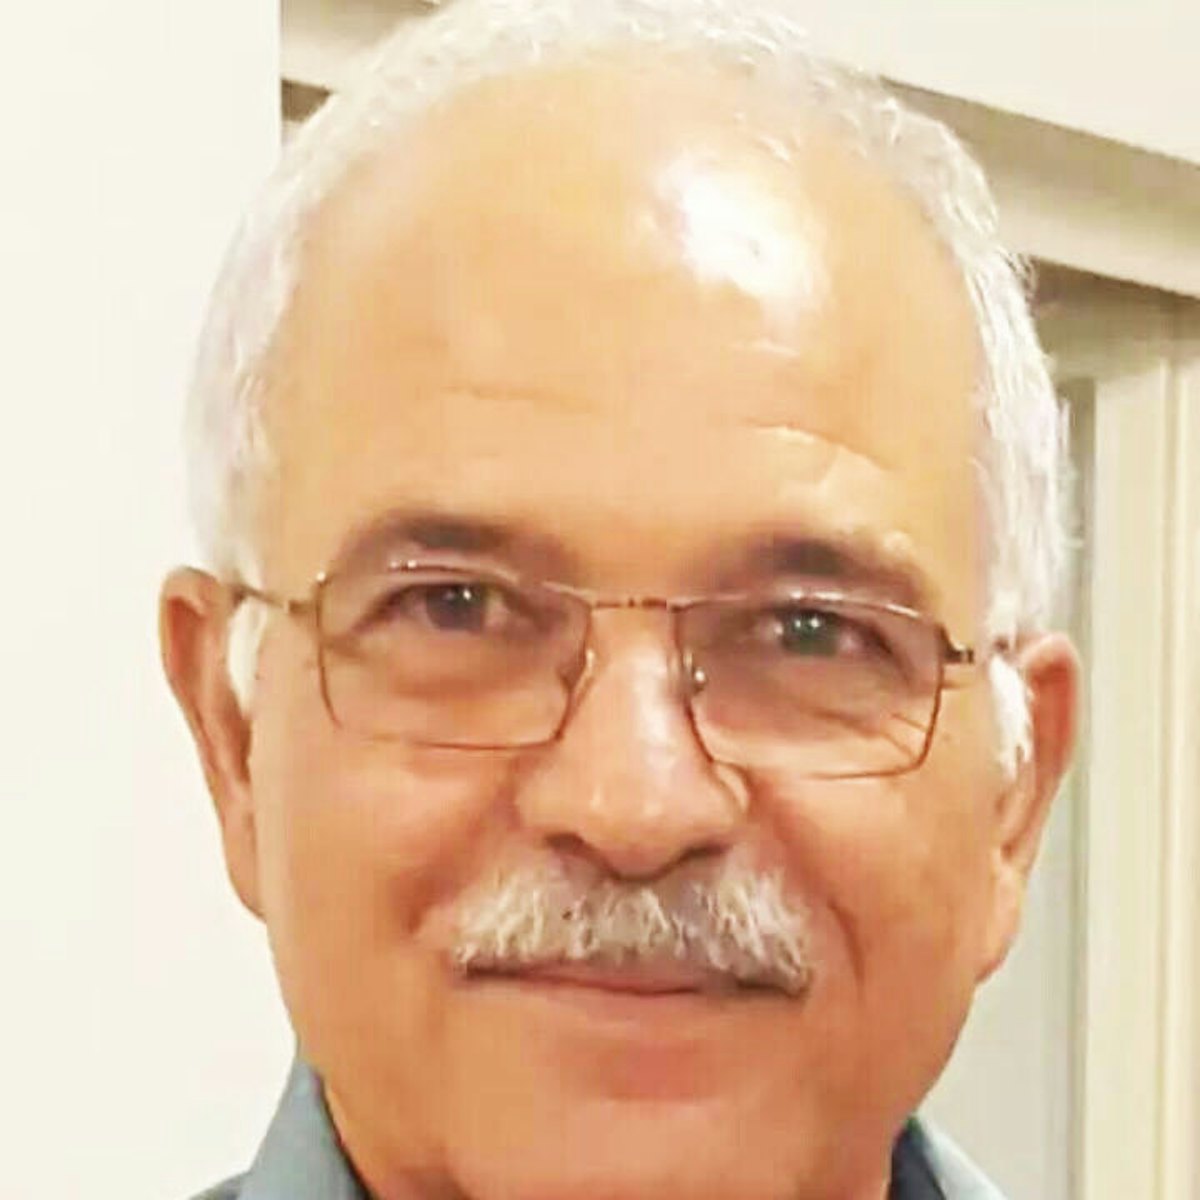 Farhang Amiri, 63, was murdered outside his home on 26 September 2016 in the city of Yazd, Iran, where he and his family have long resided.